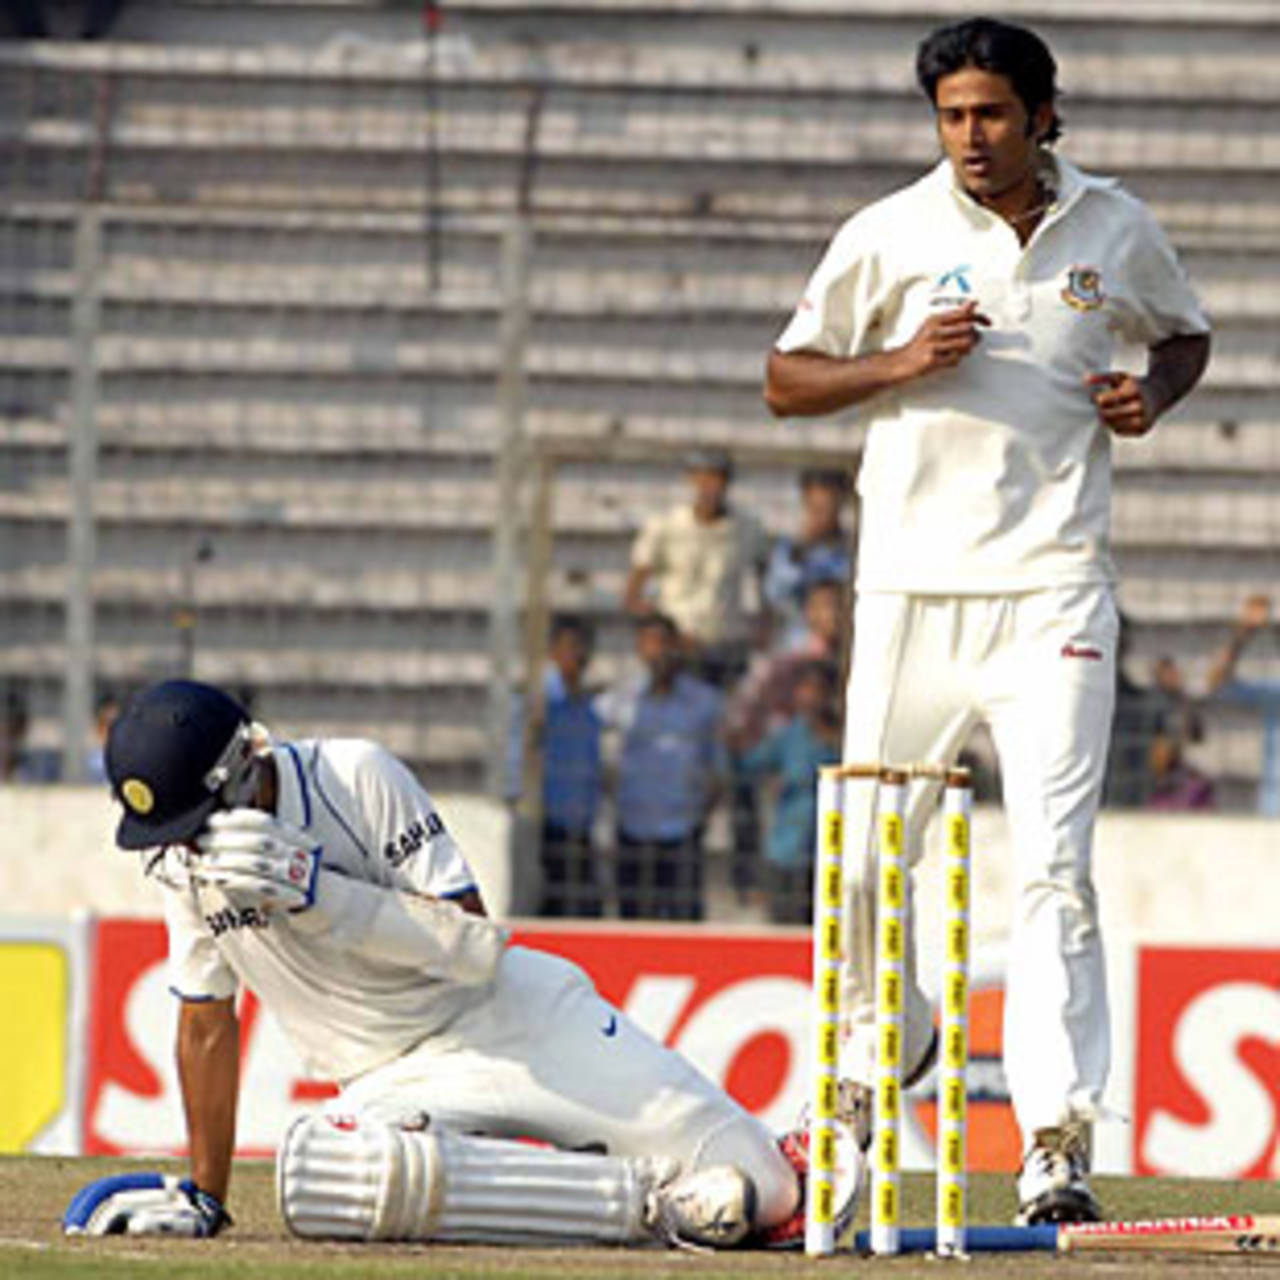 Rahul Dravid is in serious pain after being hit, as the bowler Shahadat Hossain and keeper Mushfiqur Rahim look on, Bangladesh v India, 2nd Test, Mirpur, 2nd day, January 25, 2010